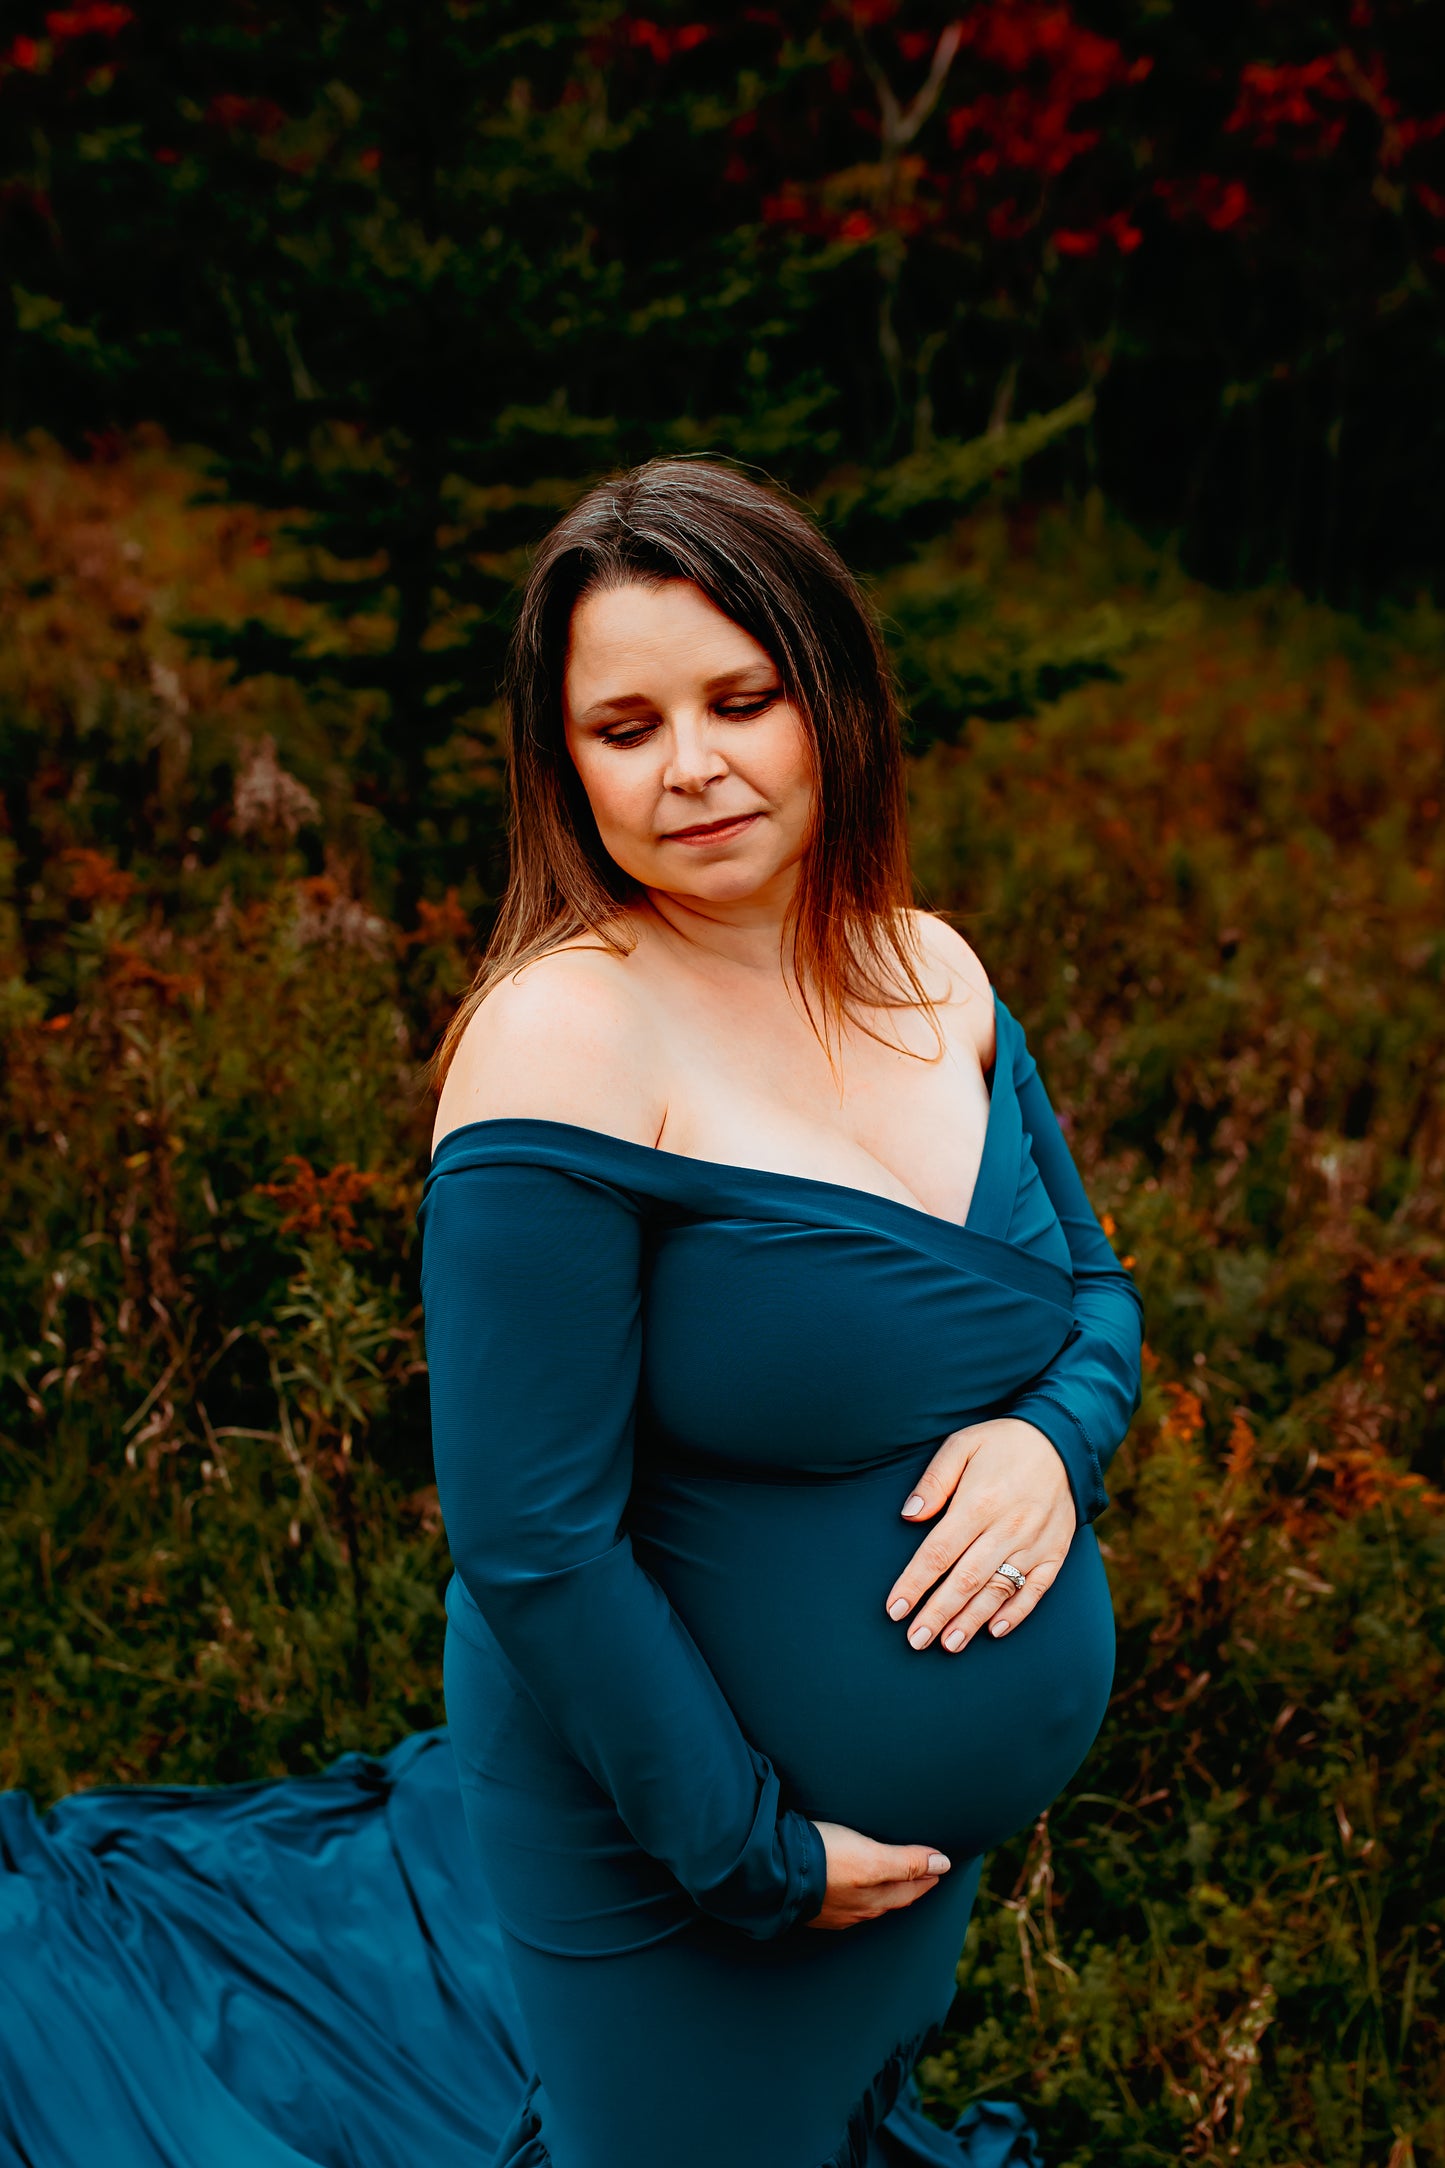 Teal Fitted Maternity Gown - maternity photoshoot dress